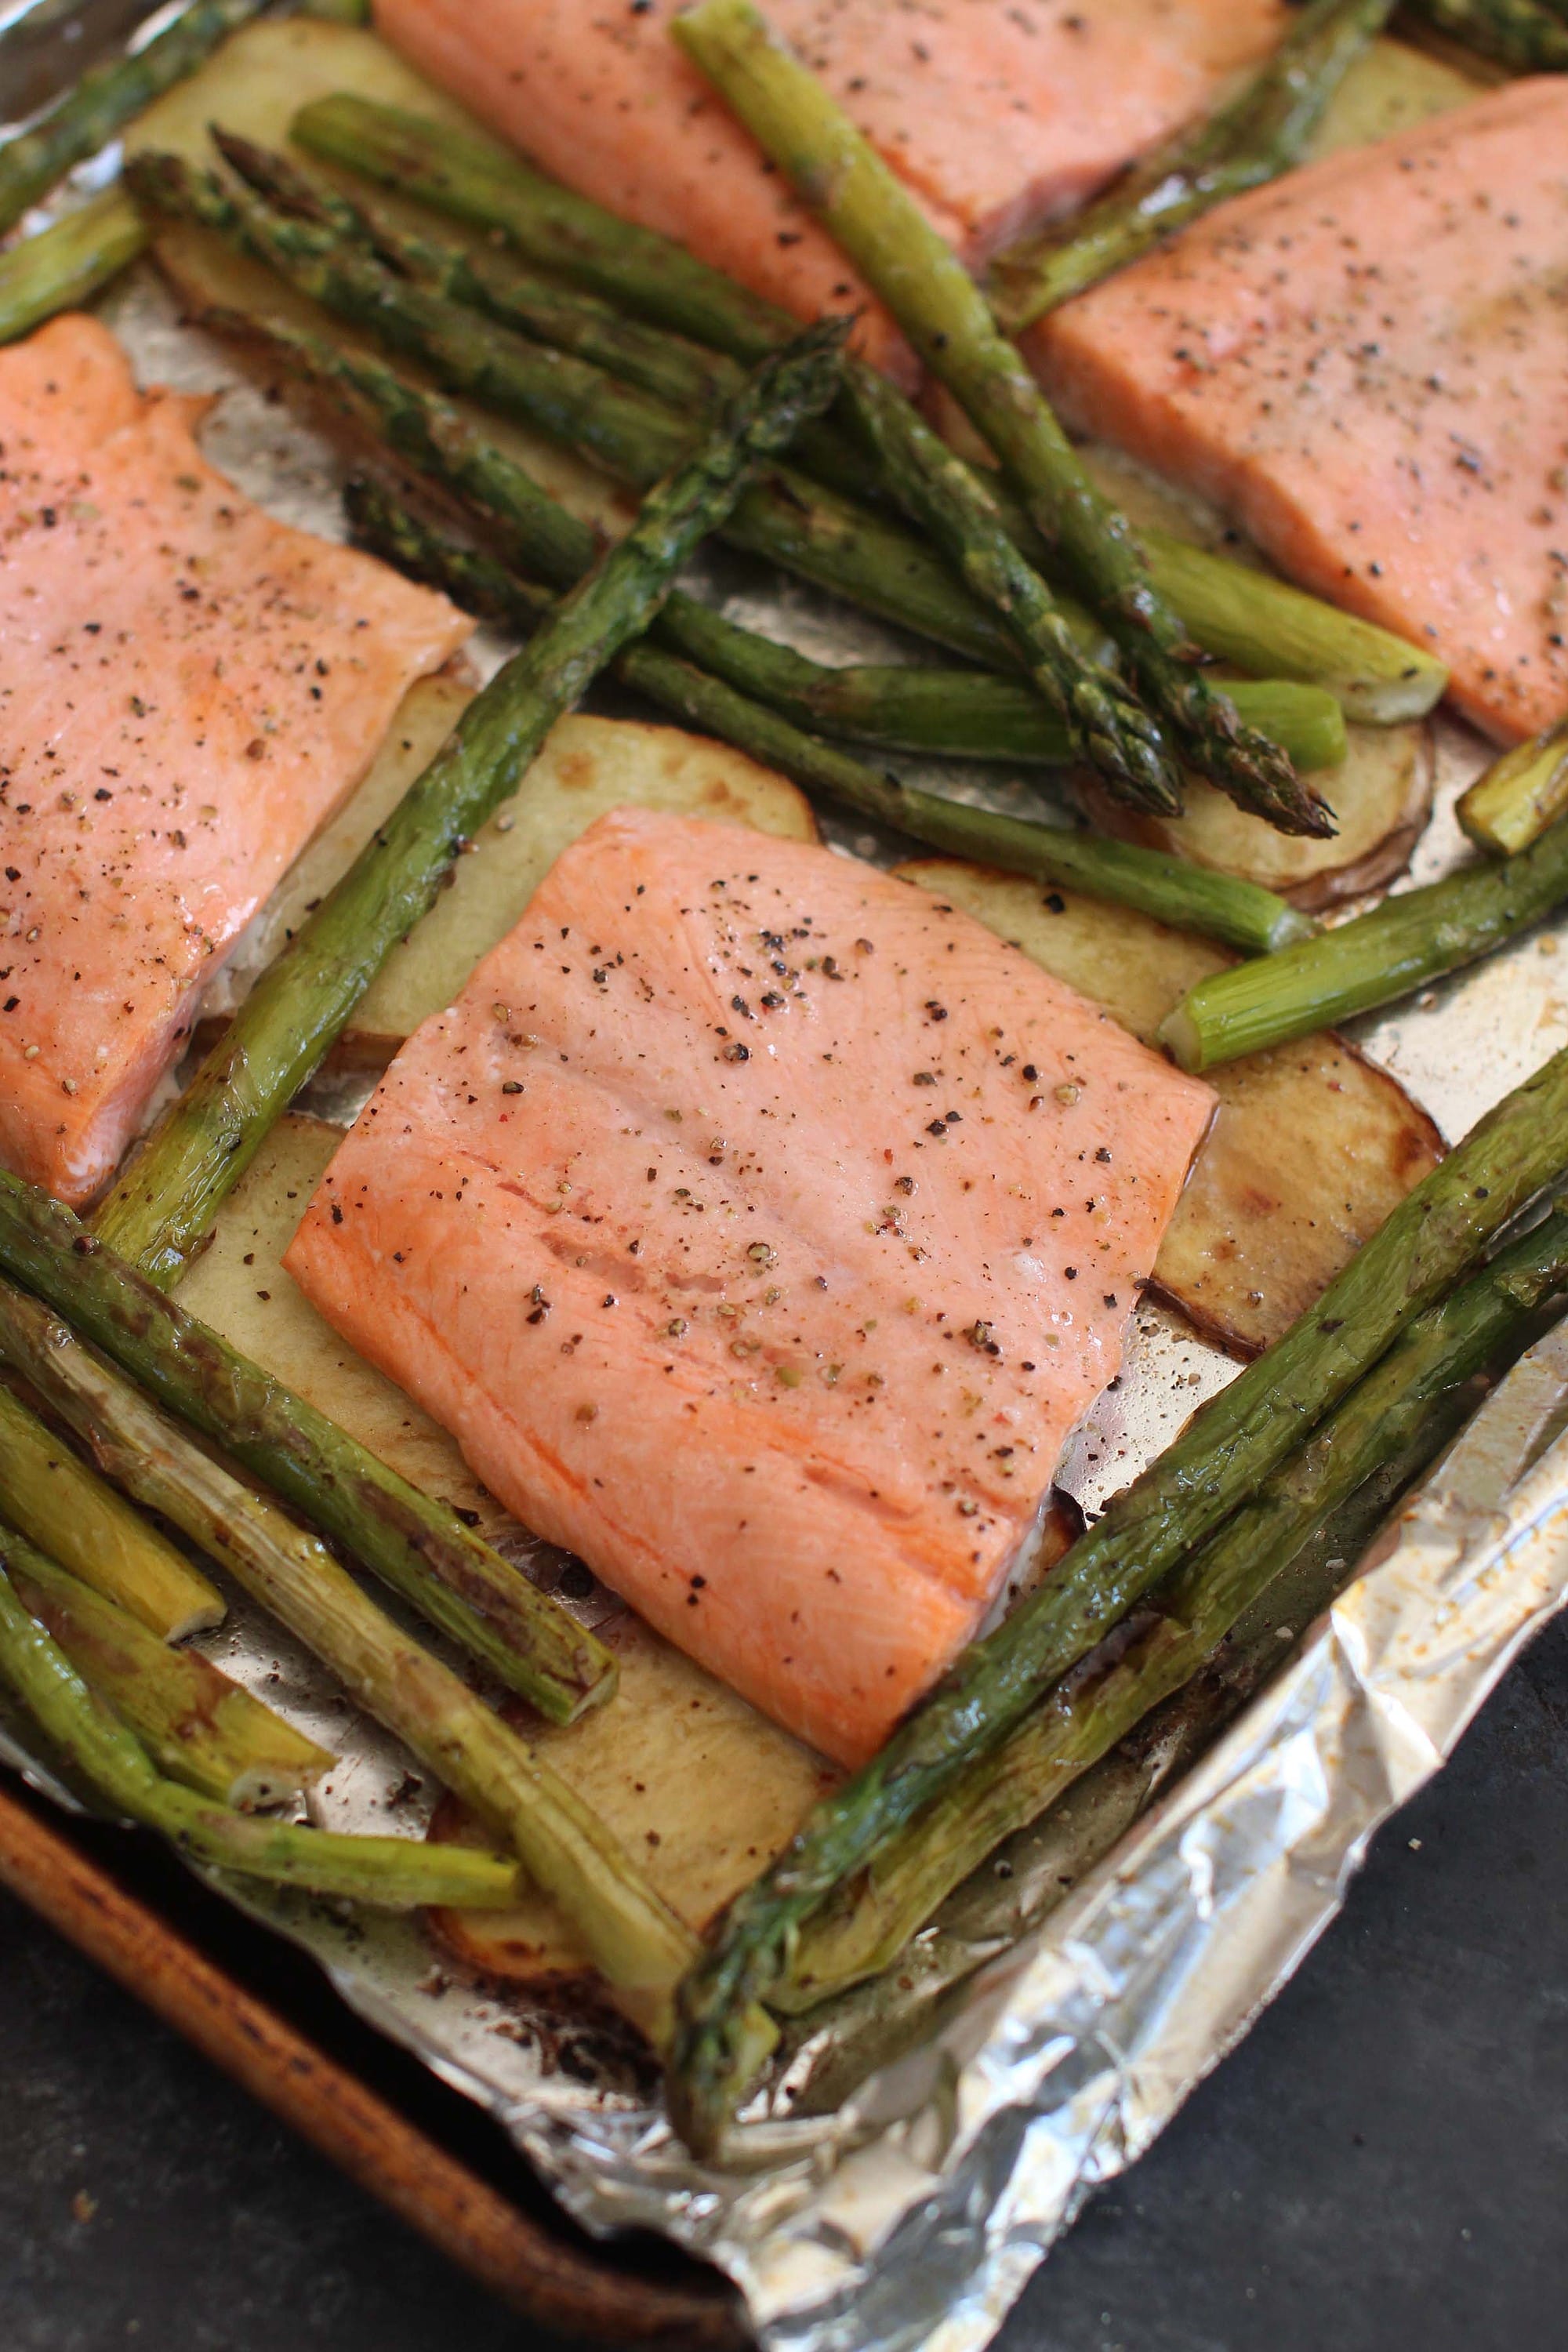 Baked steelhead trout with asparagus, potatoes and herbs